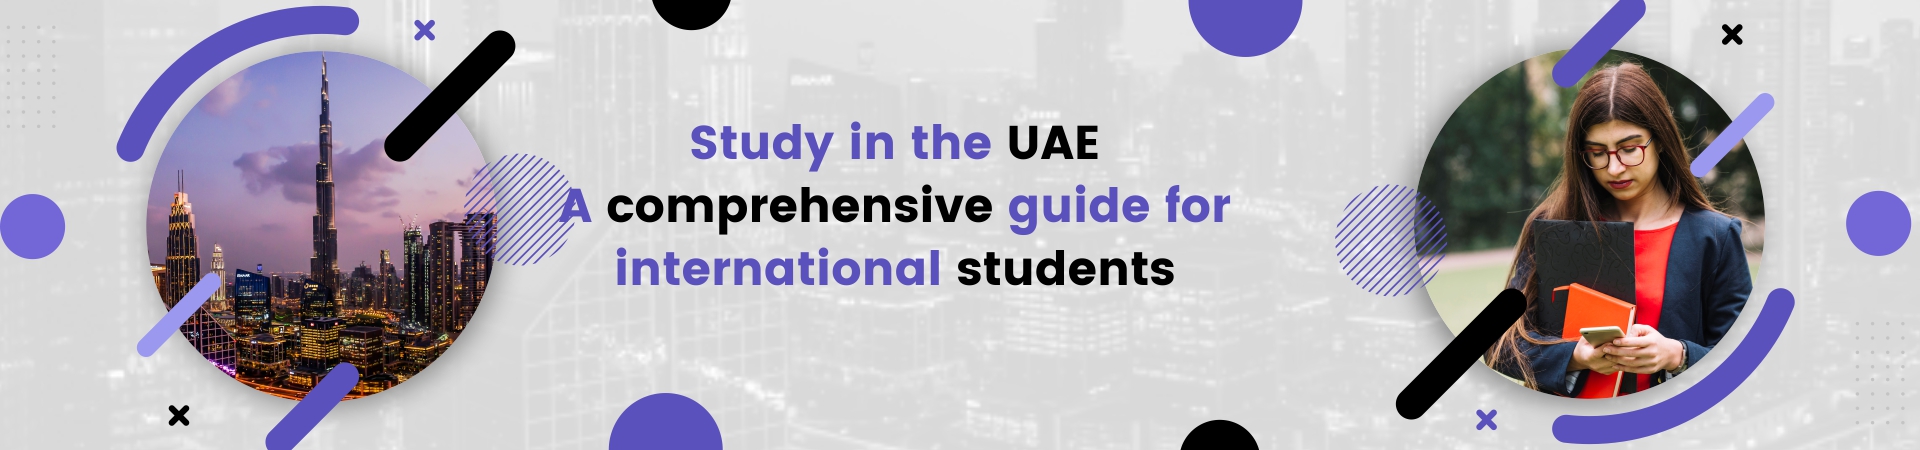 Study in the UAE- A comprehensive guide for international students